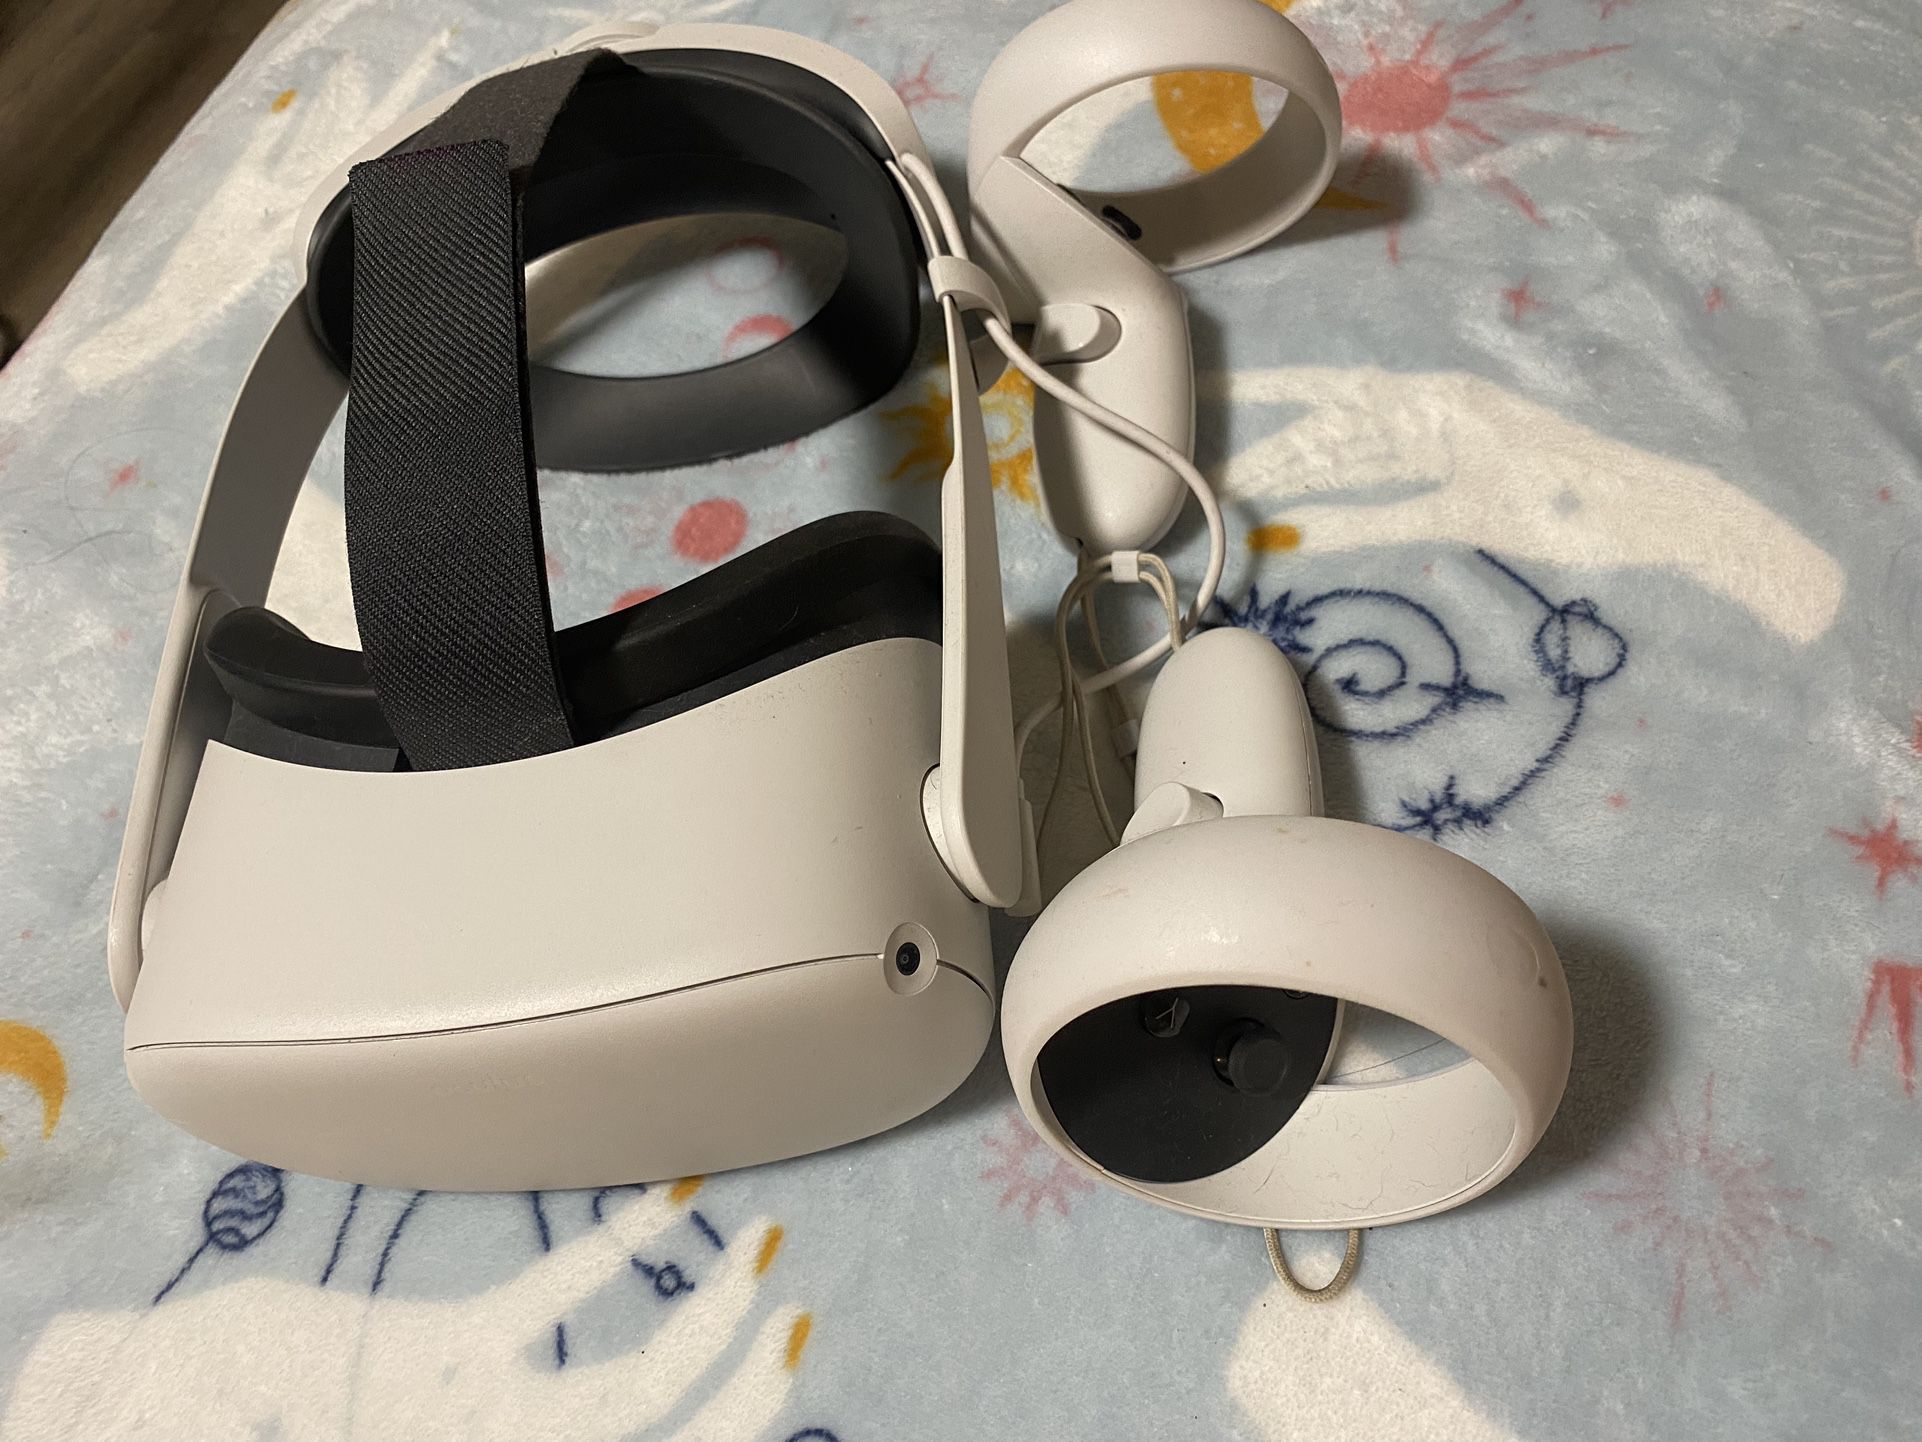 Quest 2 VR Headset w/ Battery Strap